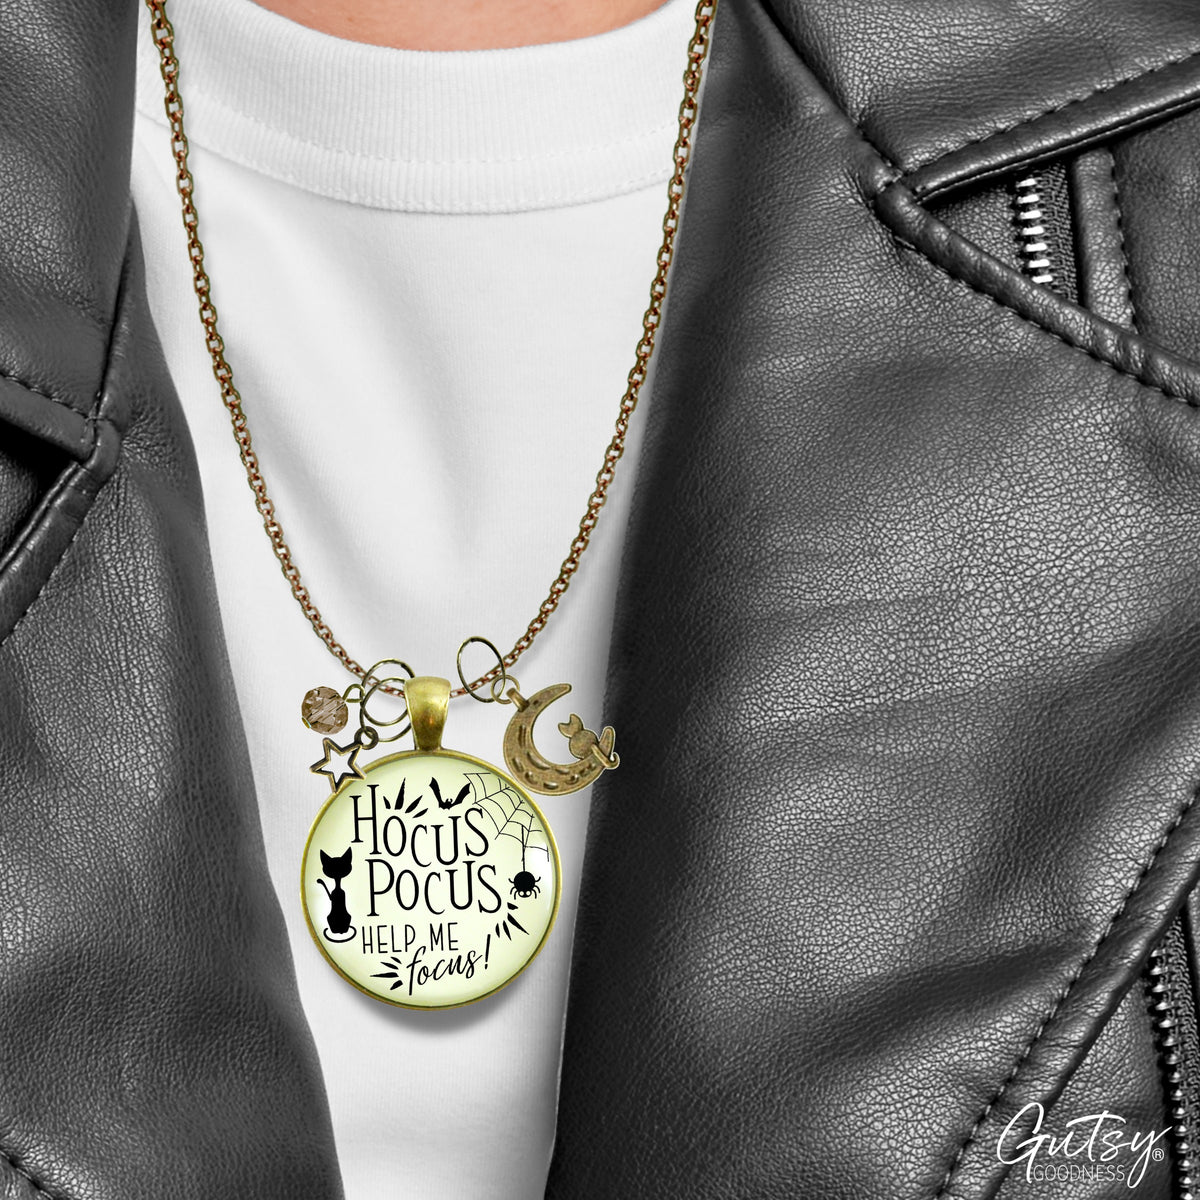 Hocus Pocus Necklace Help Me Focus Funny Halloween Spider Black Cat Jewelry for Women Costume Fashion Book Charm  Necklace - Gutsy Goodness Handmade Jewelry